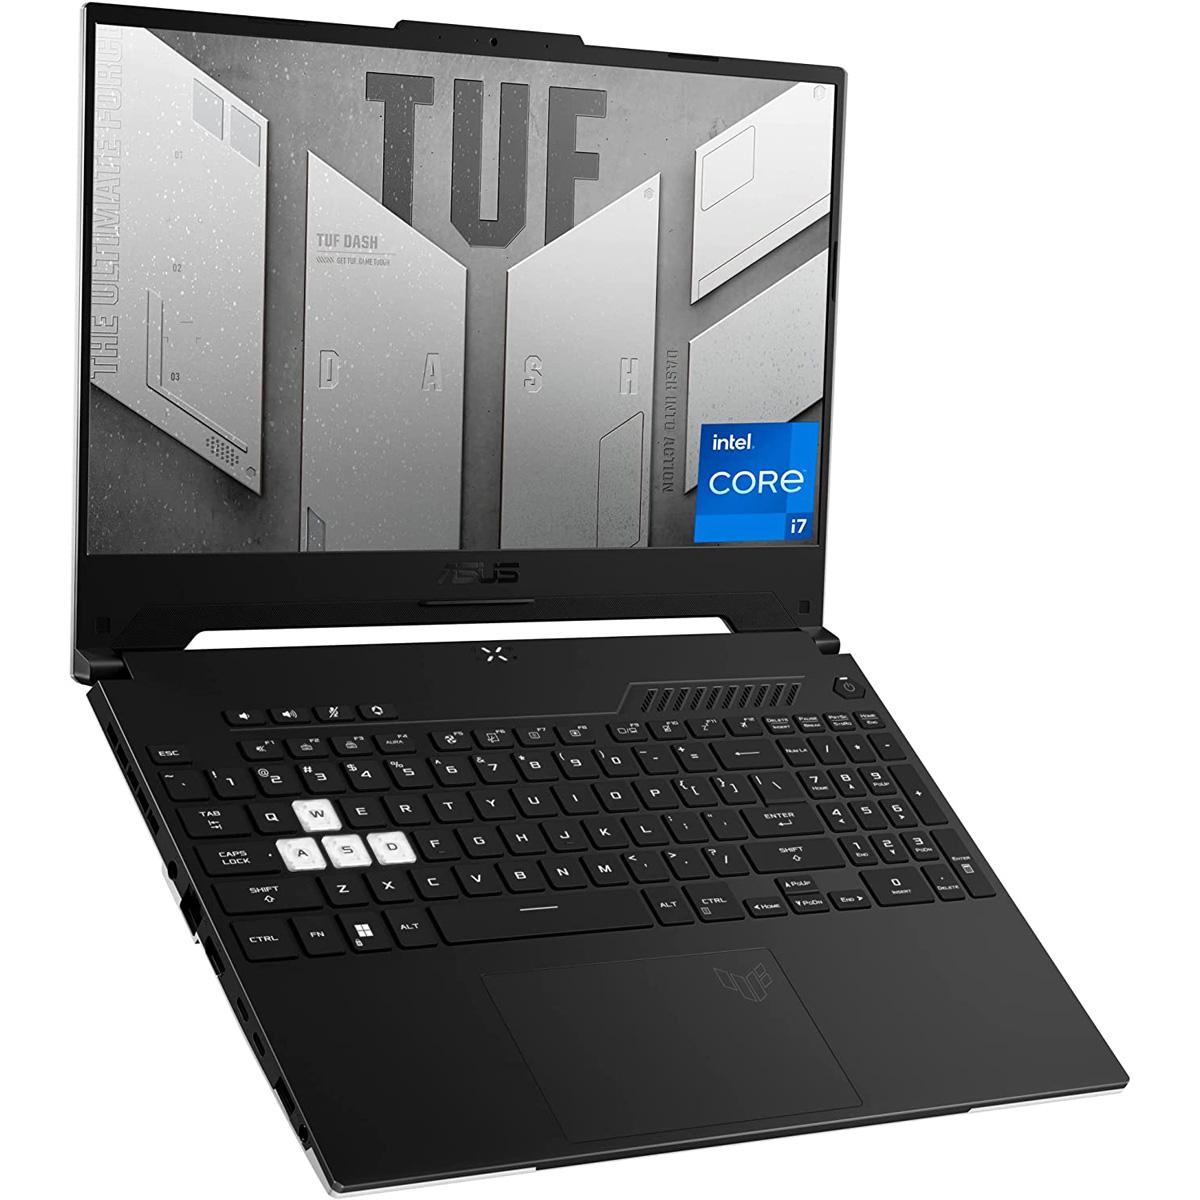 ASUS TUF Dash 15.6in i7 16GB 512GB RTX 3060 Gaming Laptop for $1069.99 Shipped